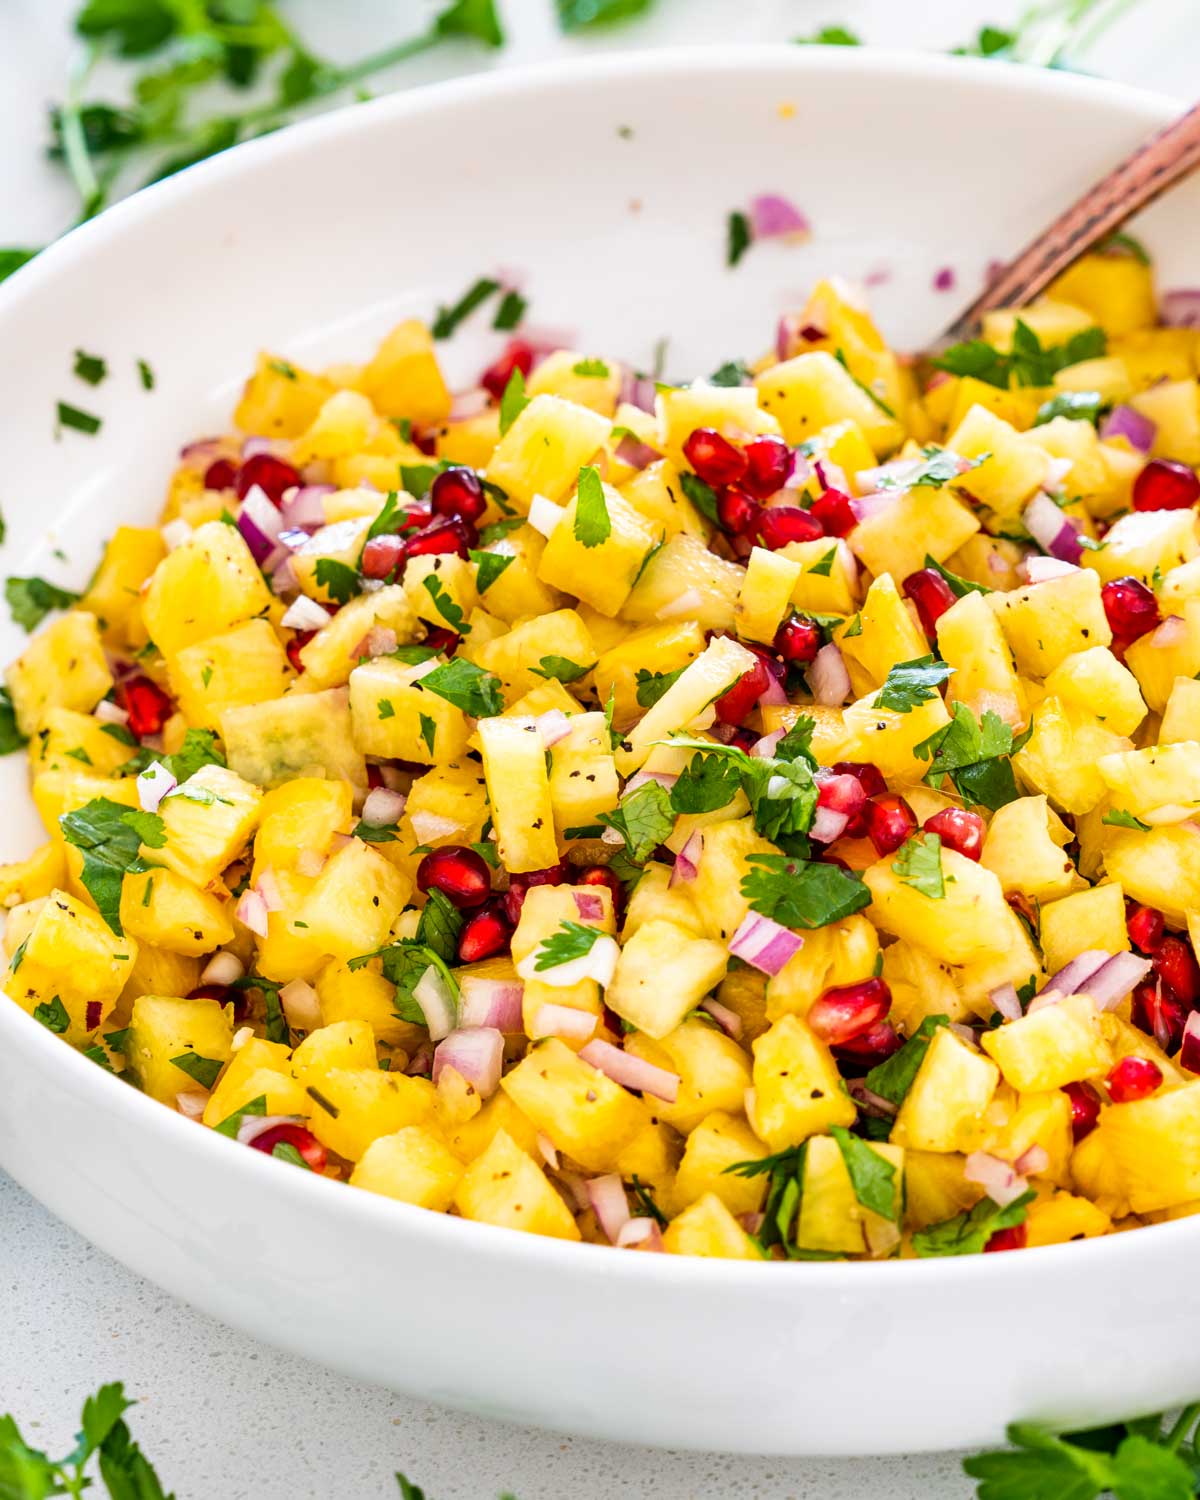 freshly made pineapple salsa in a white bowl.